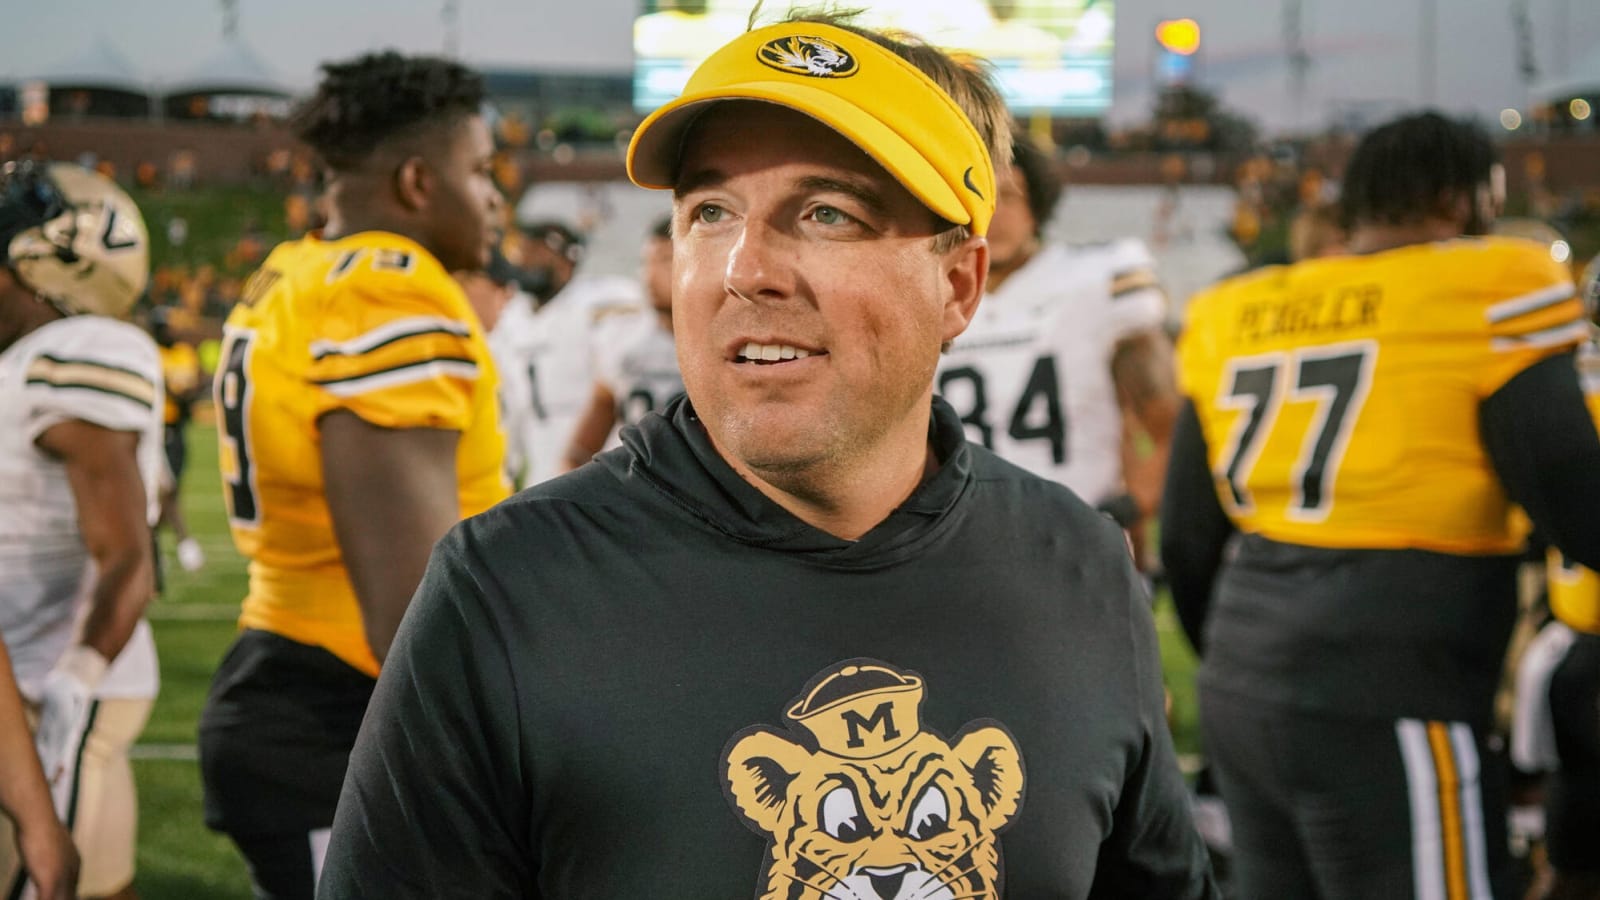 Missouri HC releases full NIL quote after getting called out